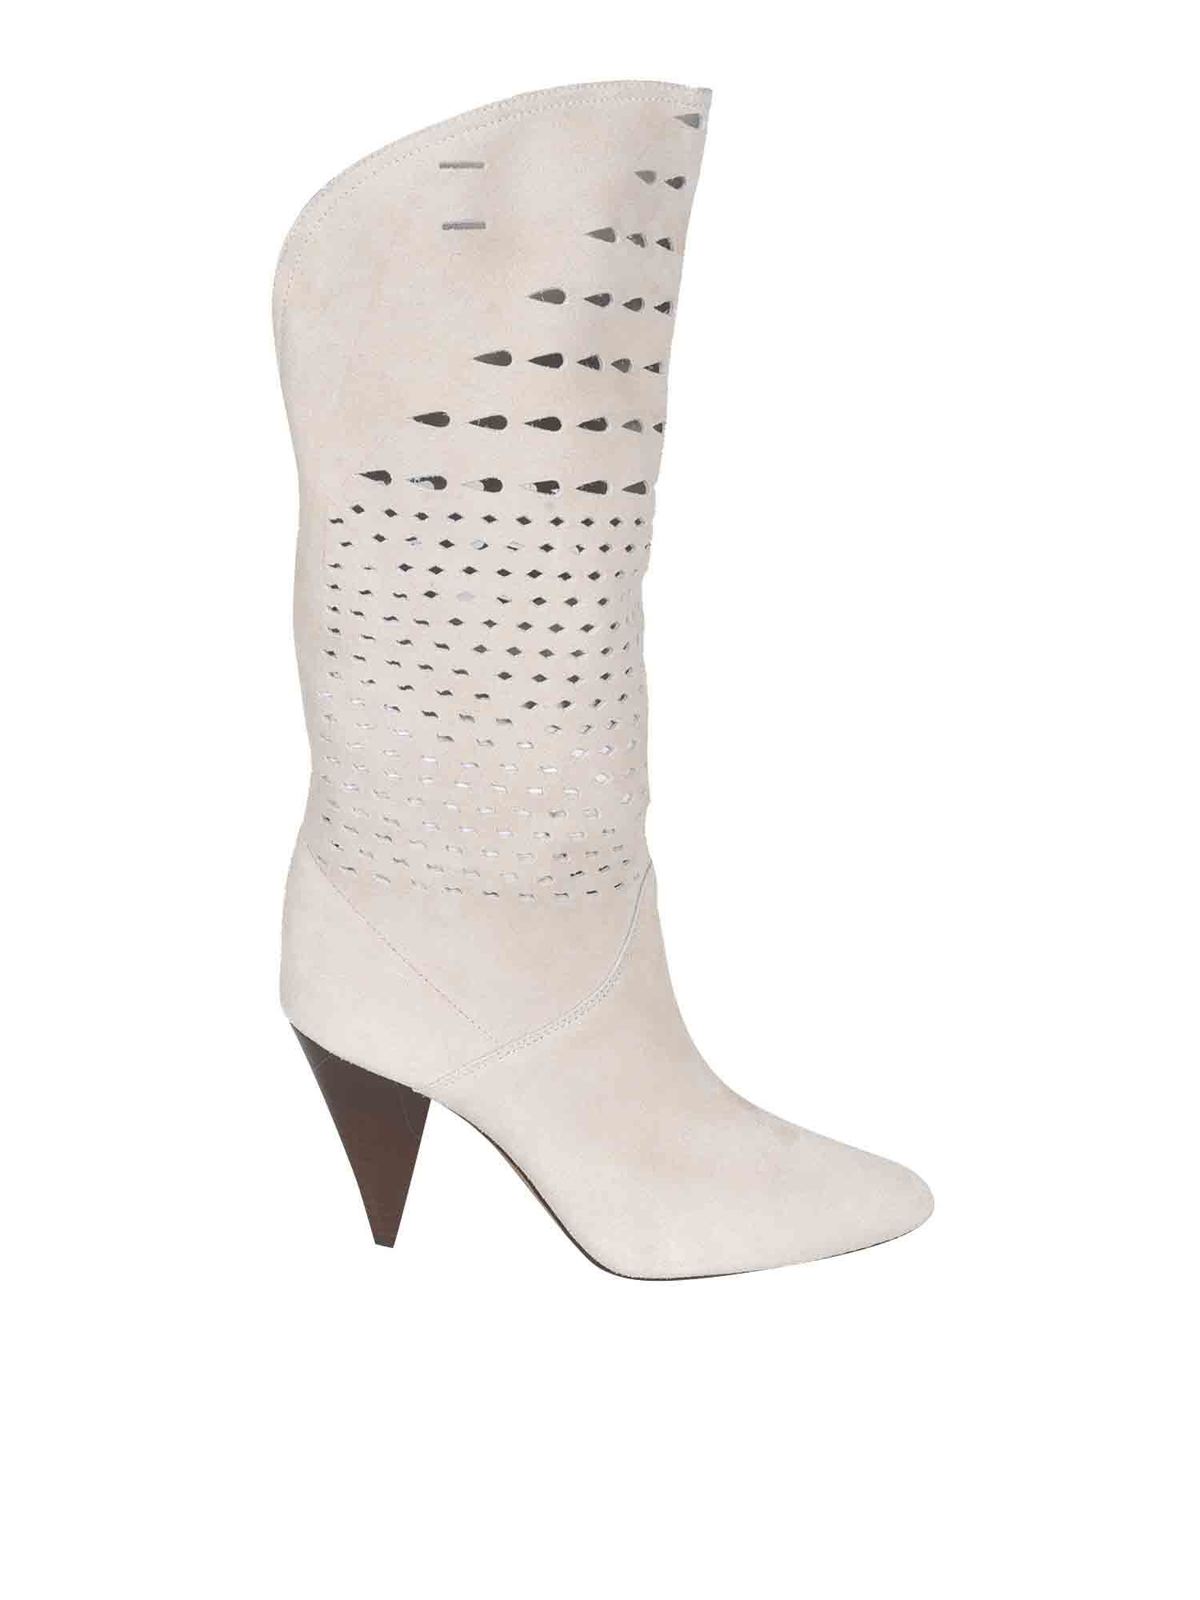 Isabel Marant - Lurrey boots in cream color - boots - BO029221P006SWHITE